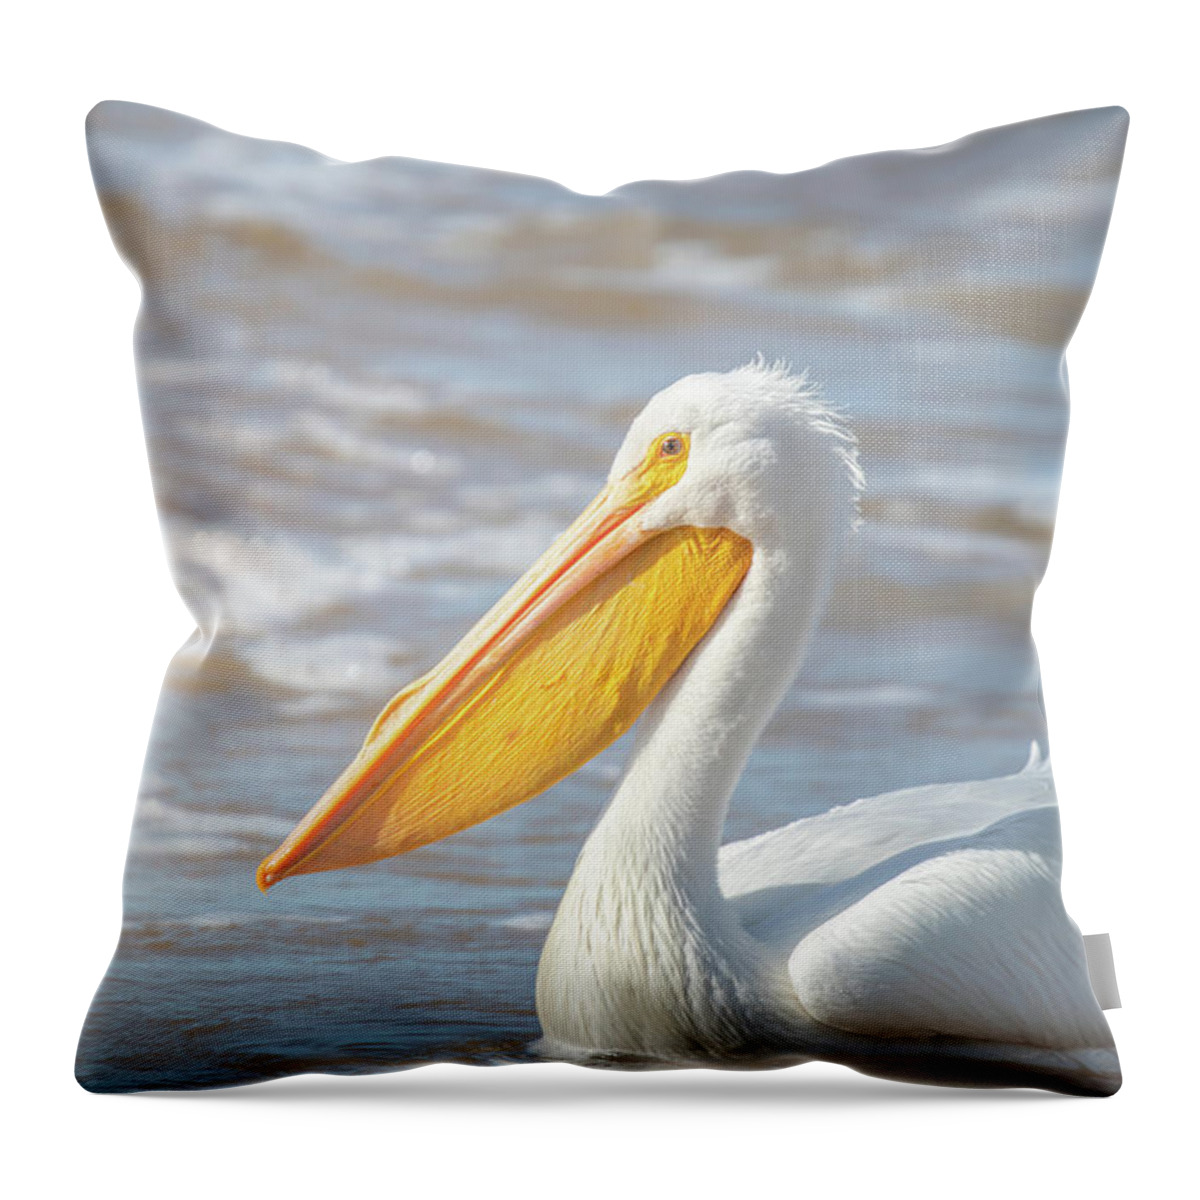 Pelican Throw Pillow featuring the photograph Pelican In The Sun by Jordan Hill